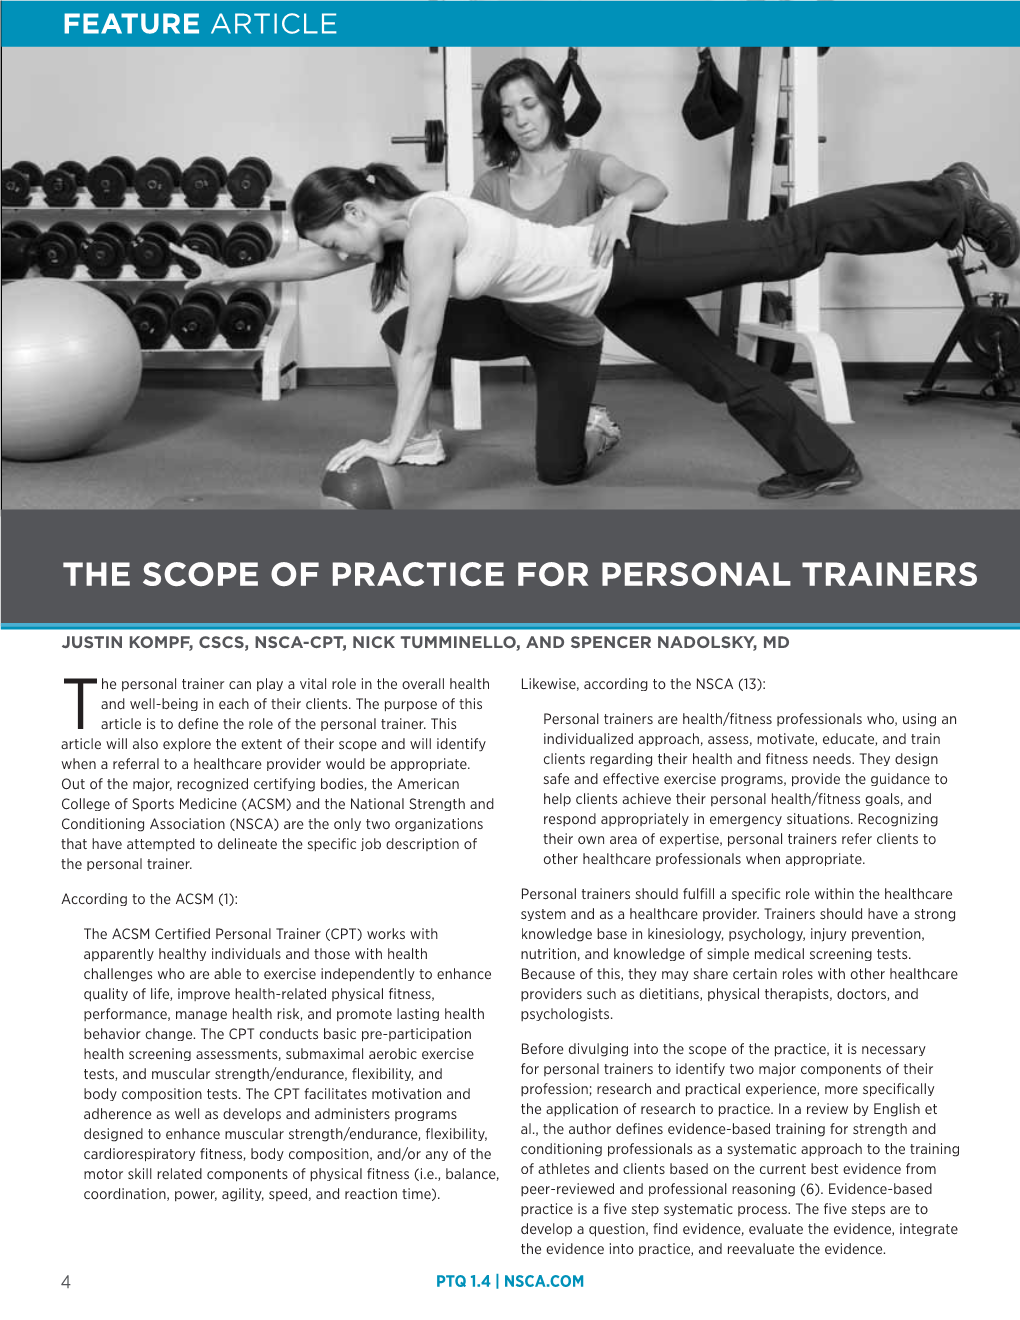 The Scope of Practice for Personal Trainers